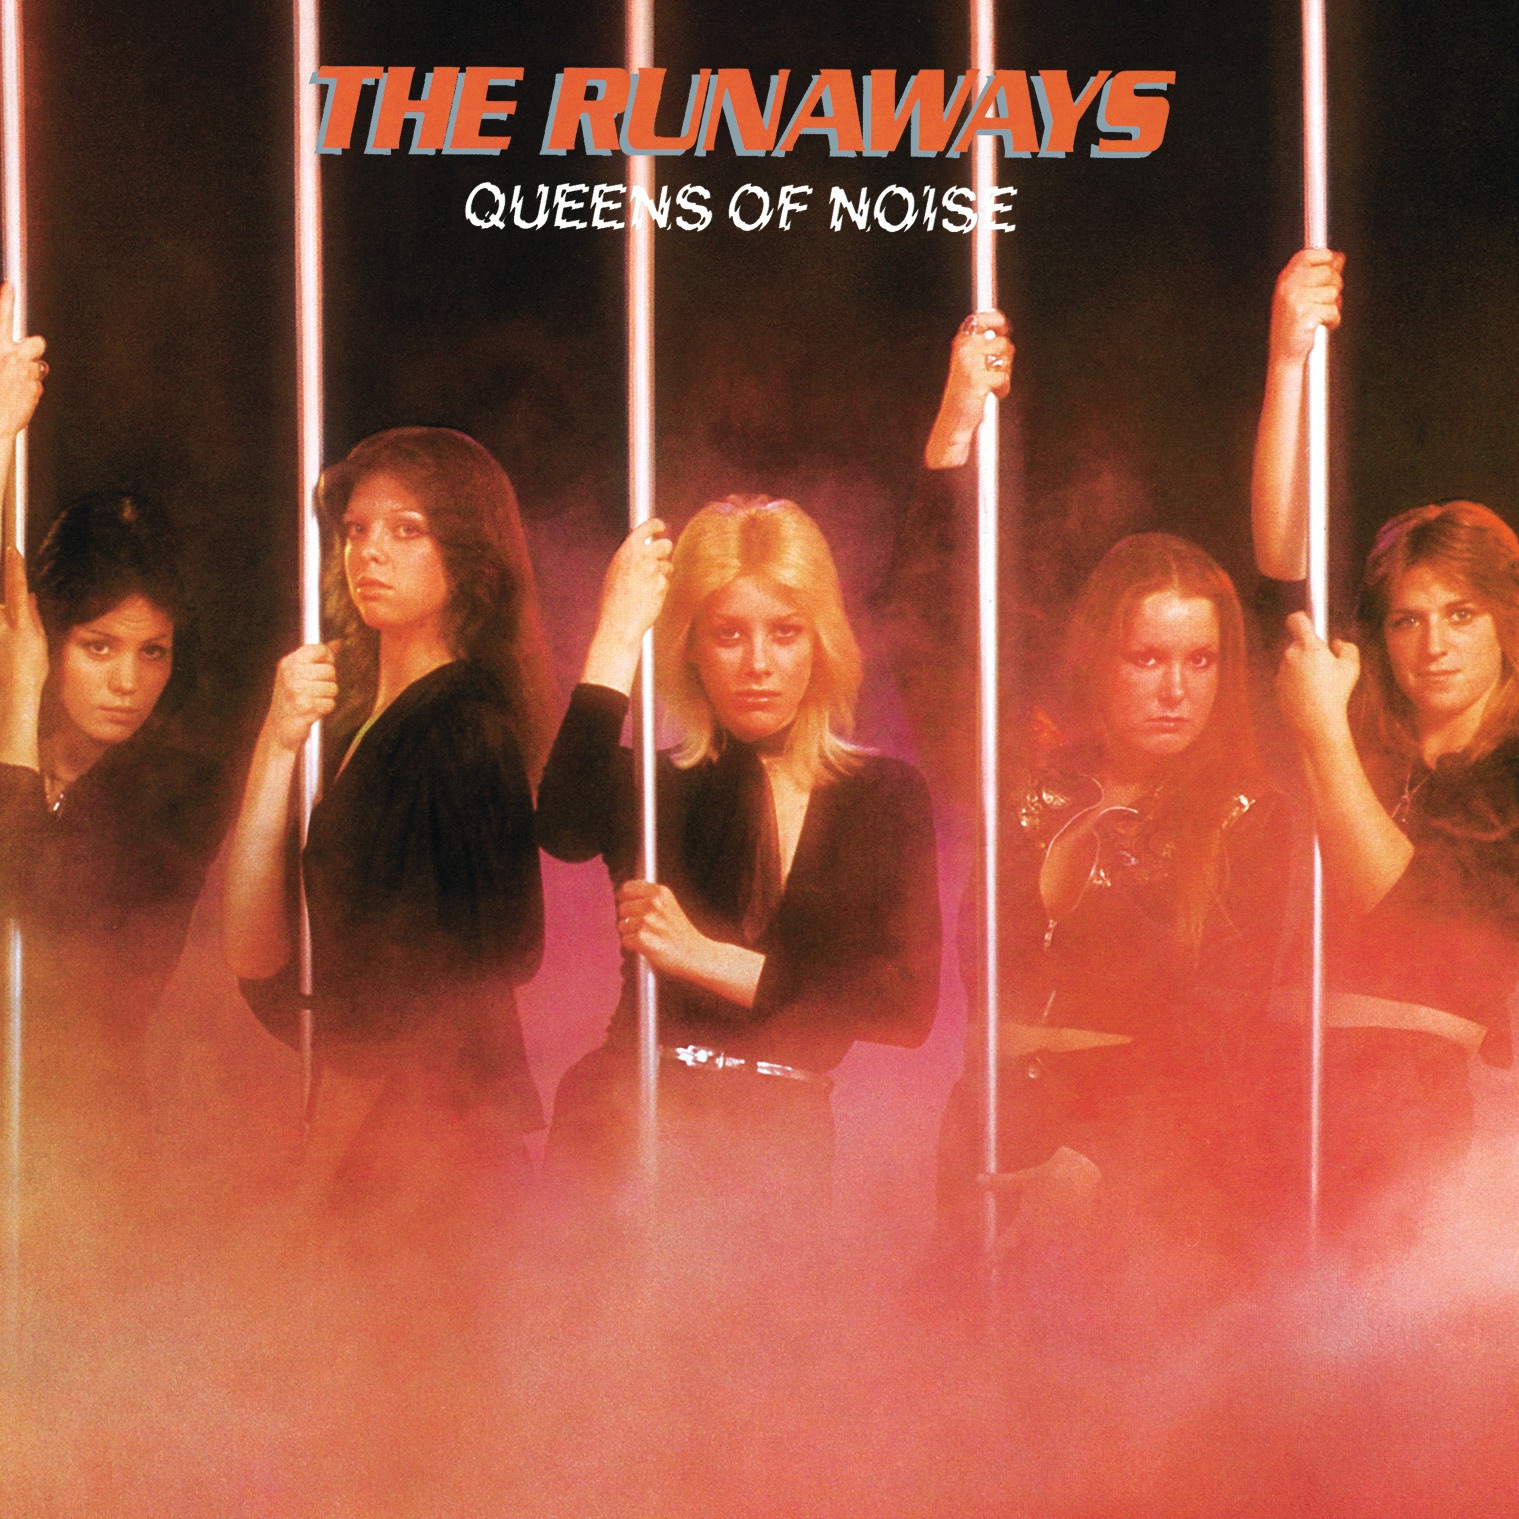 Art for I Love Playin' With Fire by The Runaways